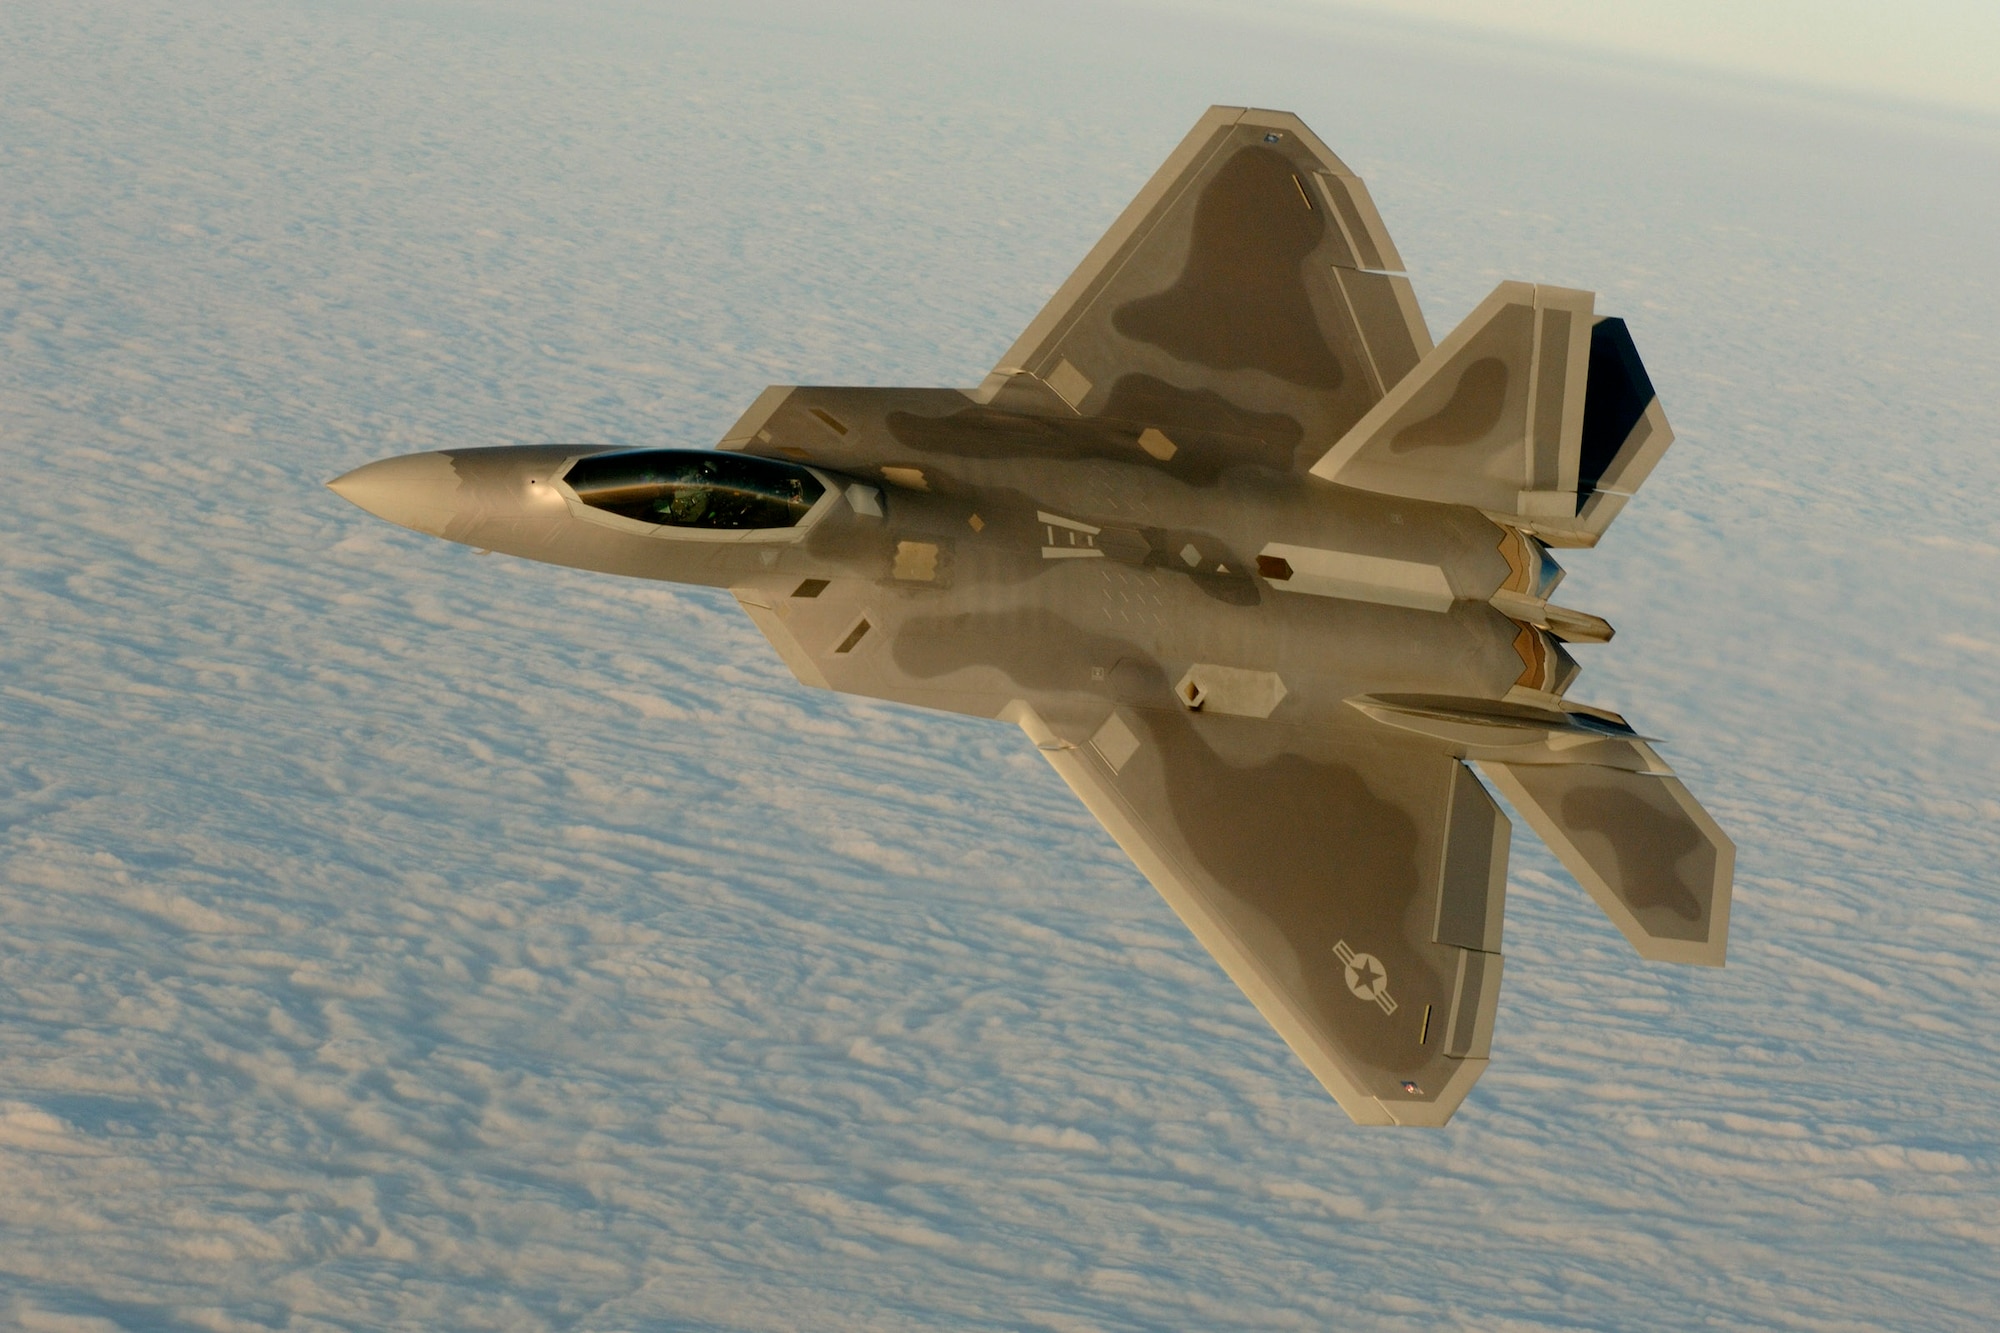 OVER THE ATLANTIC OCEAN (AFPN) -- Capt. Chris Batterton aggressively banks his F-22A Raptor during a basic fighting maneuver training mission off the Virginia coast last week. The captain is with the 27th Fighter Squadron, the Air Force's first unit to fly the Raptor. The 1st Fighter Wing declared initial operational capability last month, making the Air Force's fifth generation fighter ready to fight. (U. S. Air Force Photo by TSgt Ben Bloker)